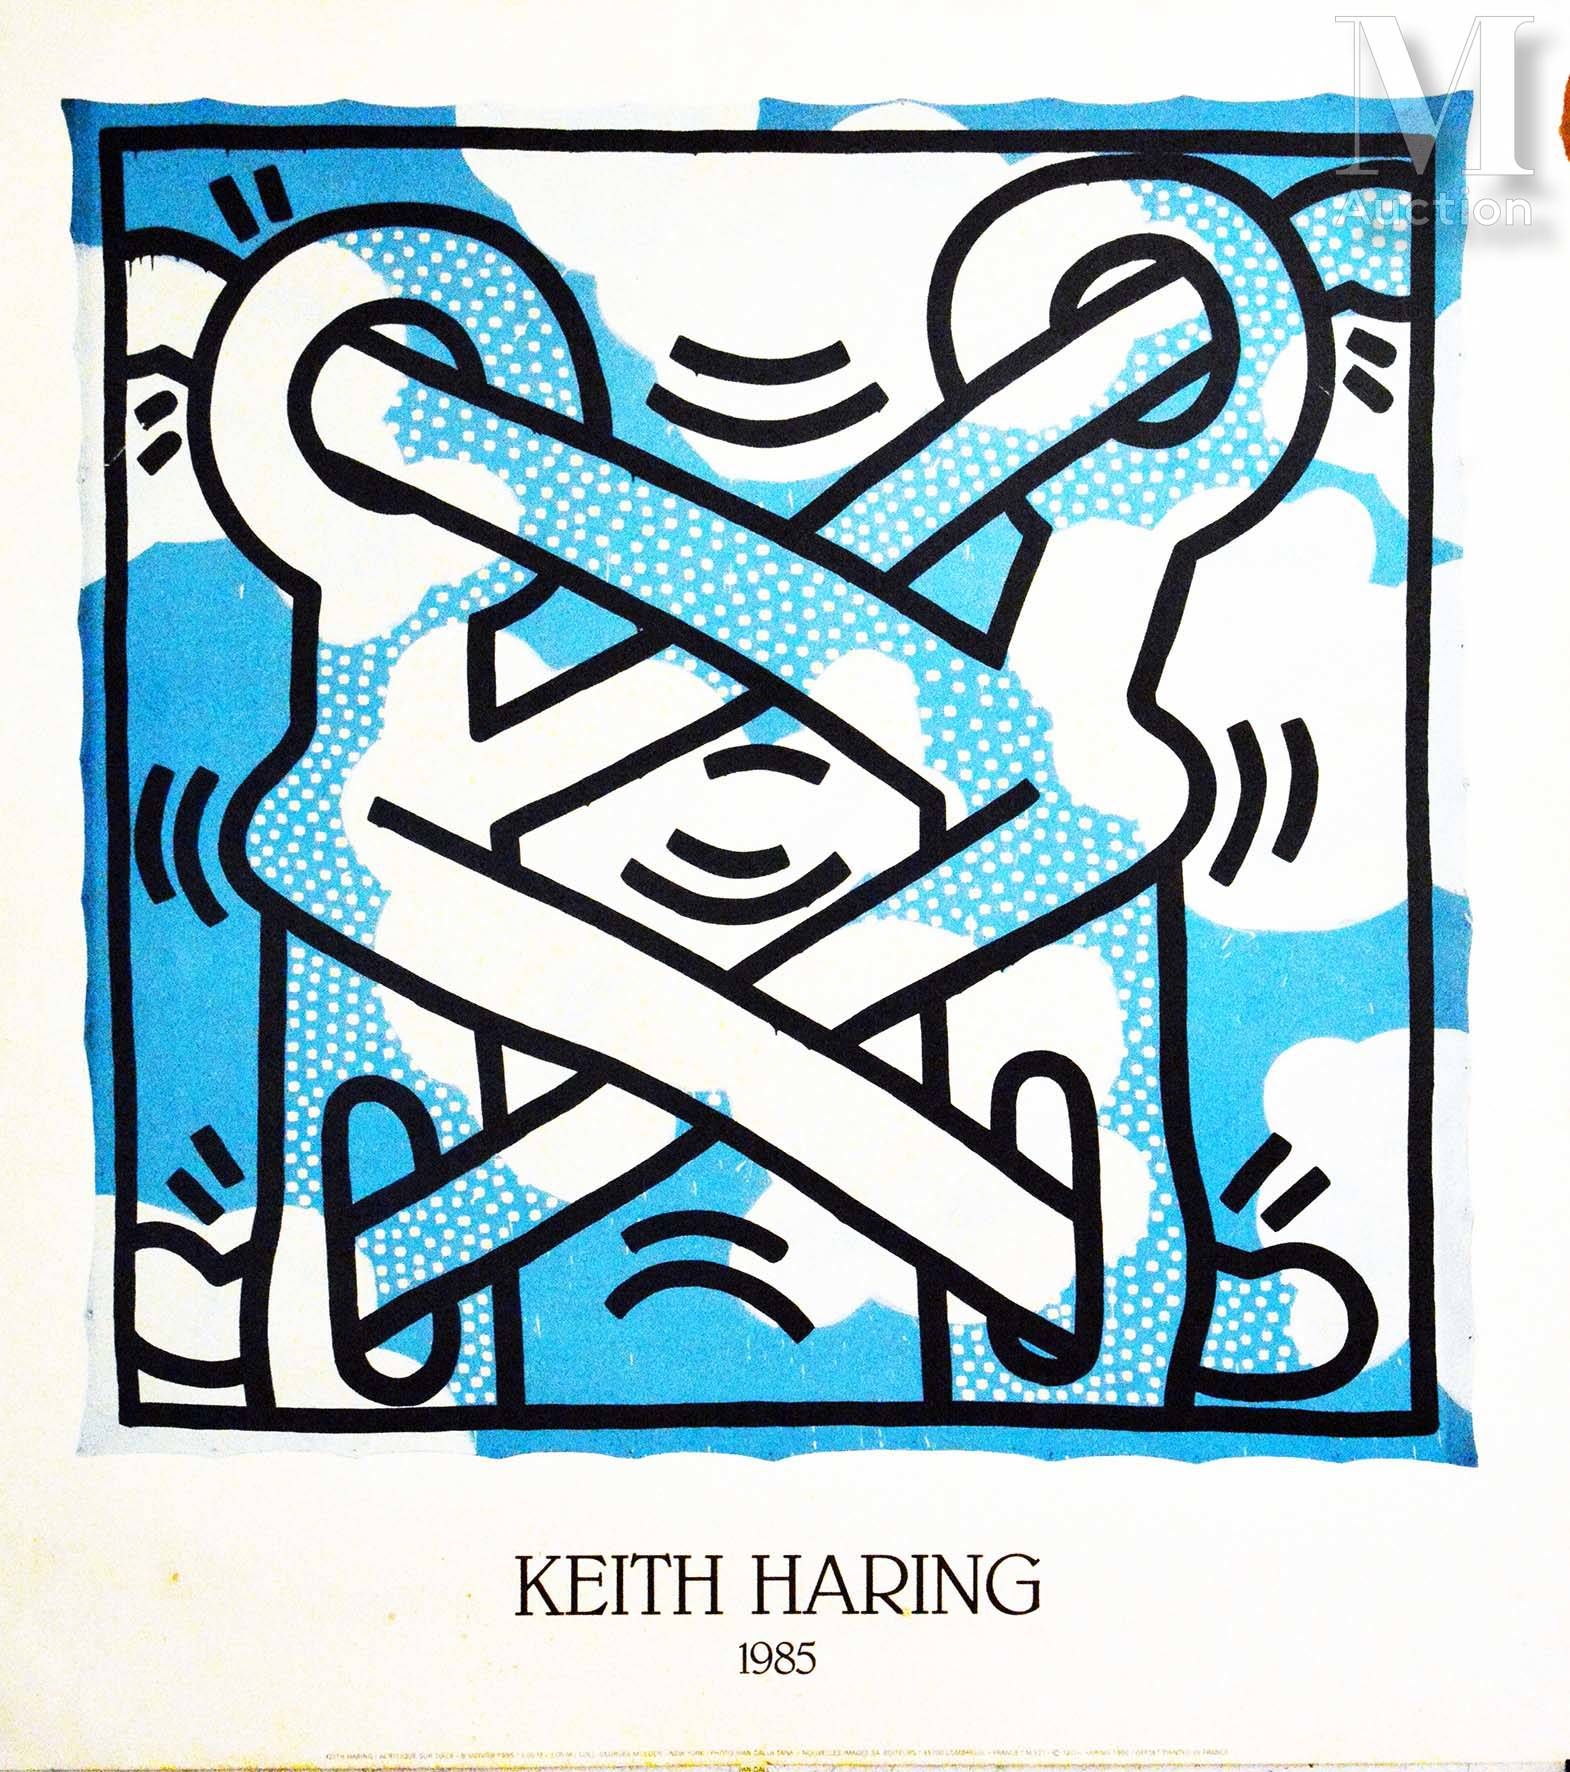 HARING KEITH Keith Haring Nouvelles Images (1985 Peinture Acrylique Bleue)
Keith&hellip;